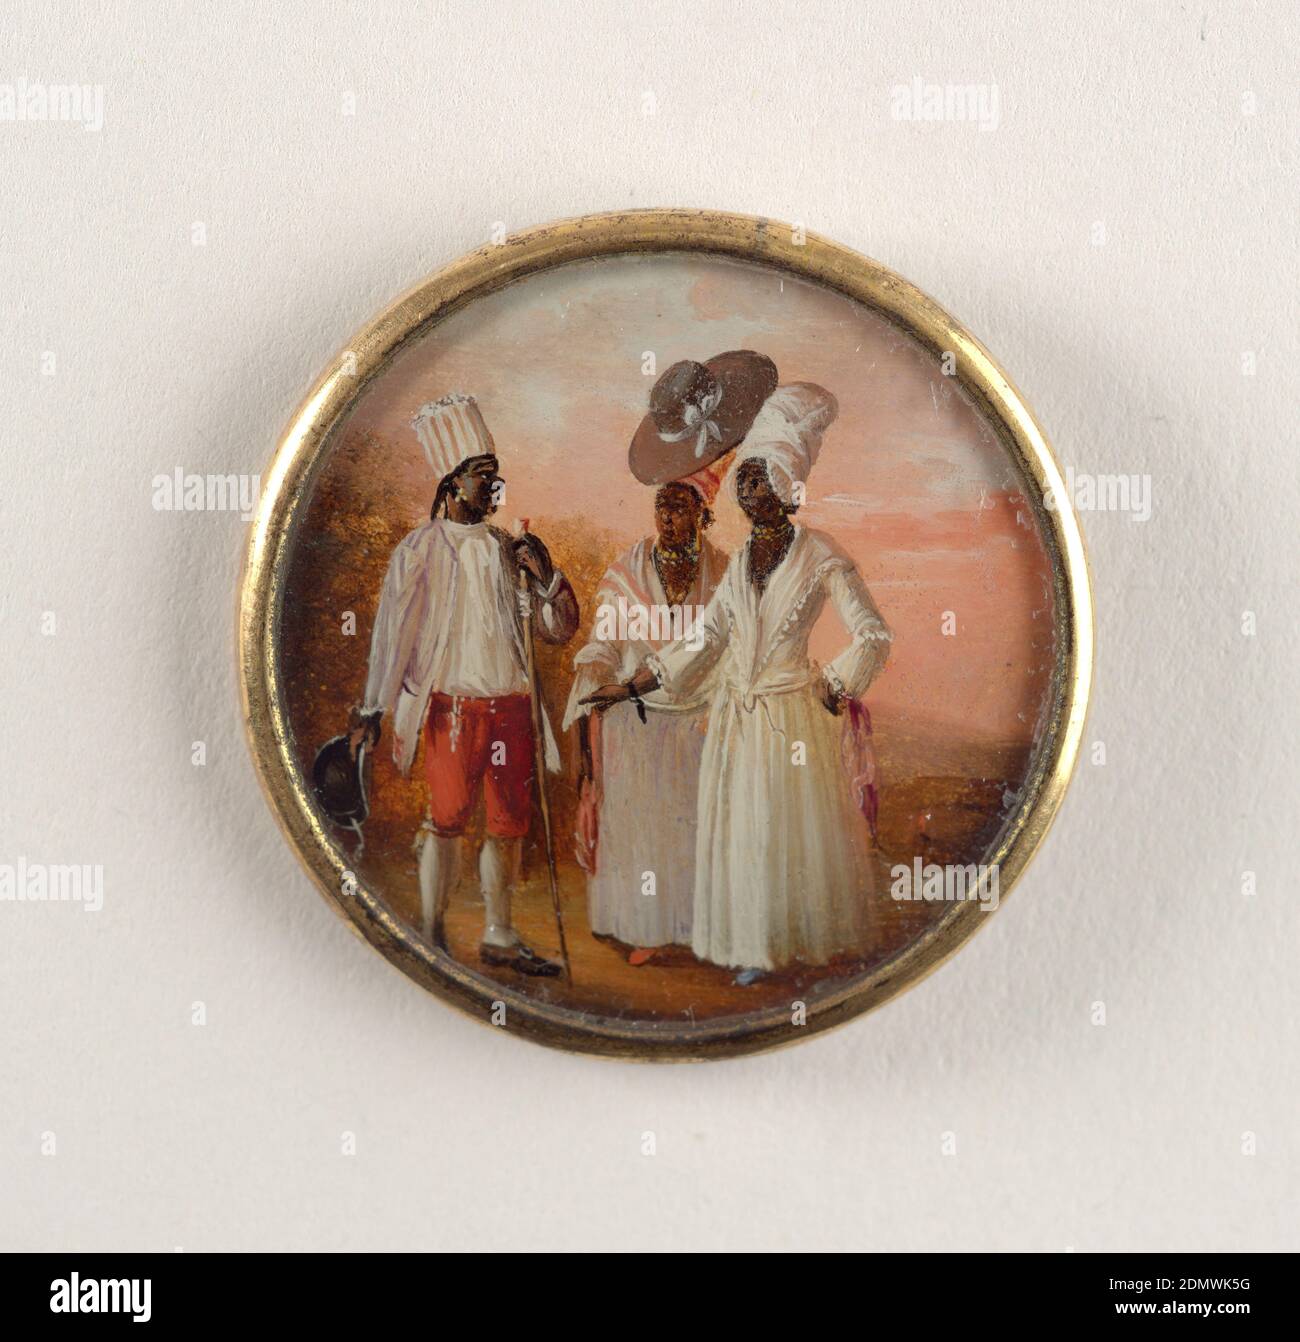 Button, Gouache paint on tin verre fixé, ivory (backing), glass, gilt metal, Button depicting scene with three figures in a pink-hued landscape. Man at left, wearing striped turban and red pants, doffs his hat for two women at right who wear white dresses and turbans; one of them women also wears a sunhat over her turban., late 18th century, costume & accessories, Decorative Arts, Button Stock Photo